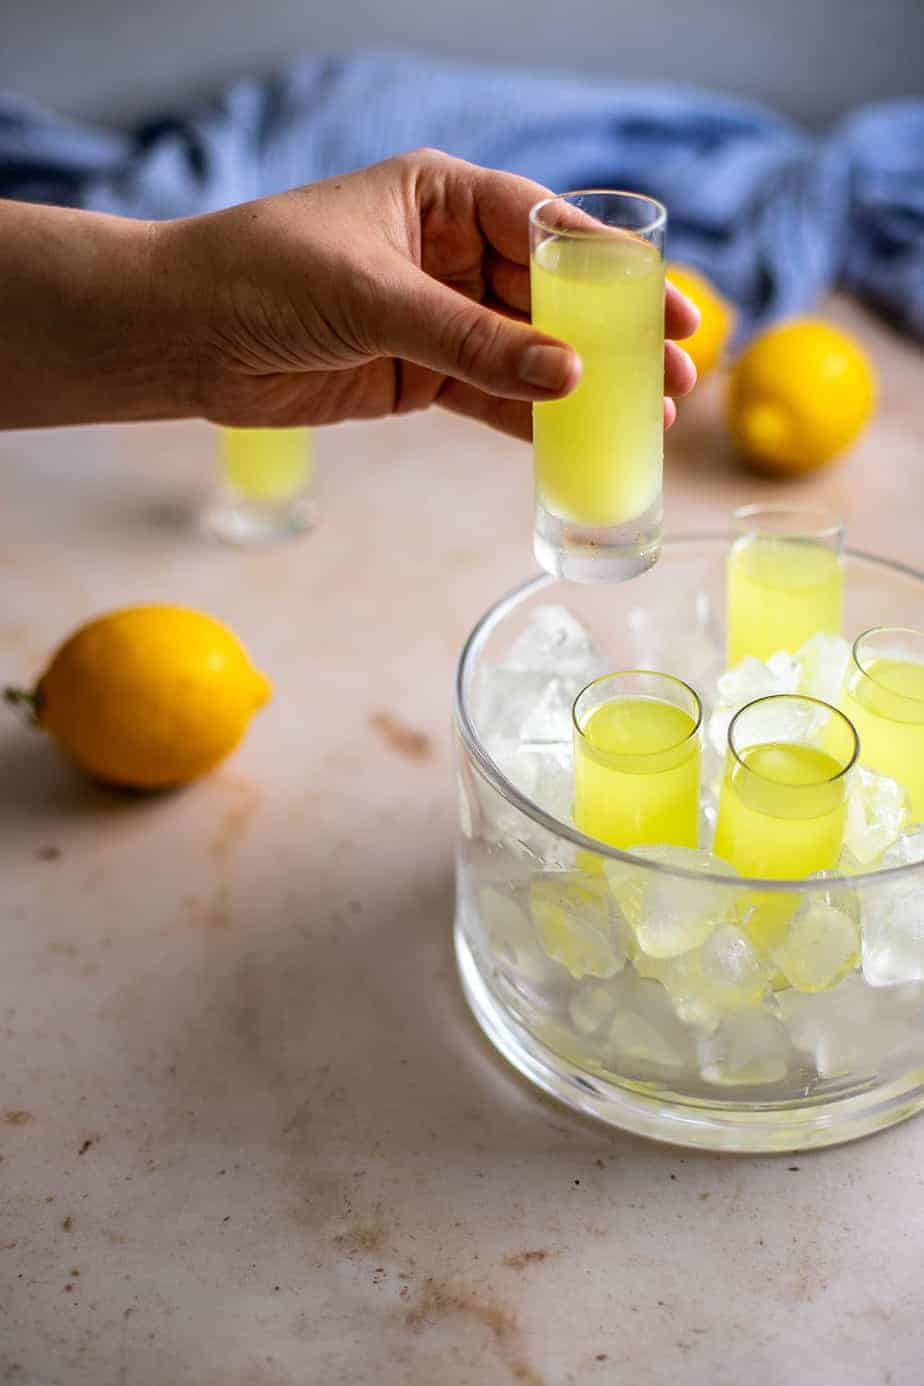 Limoncello Recipe (made with sous vide!) – A Nerd Cooks